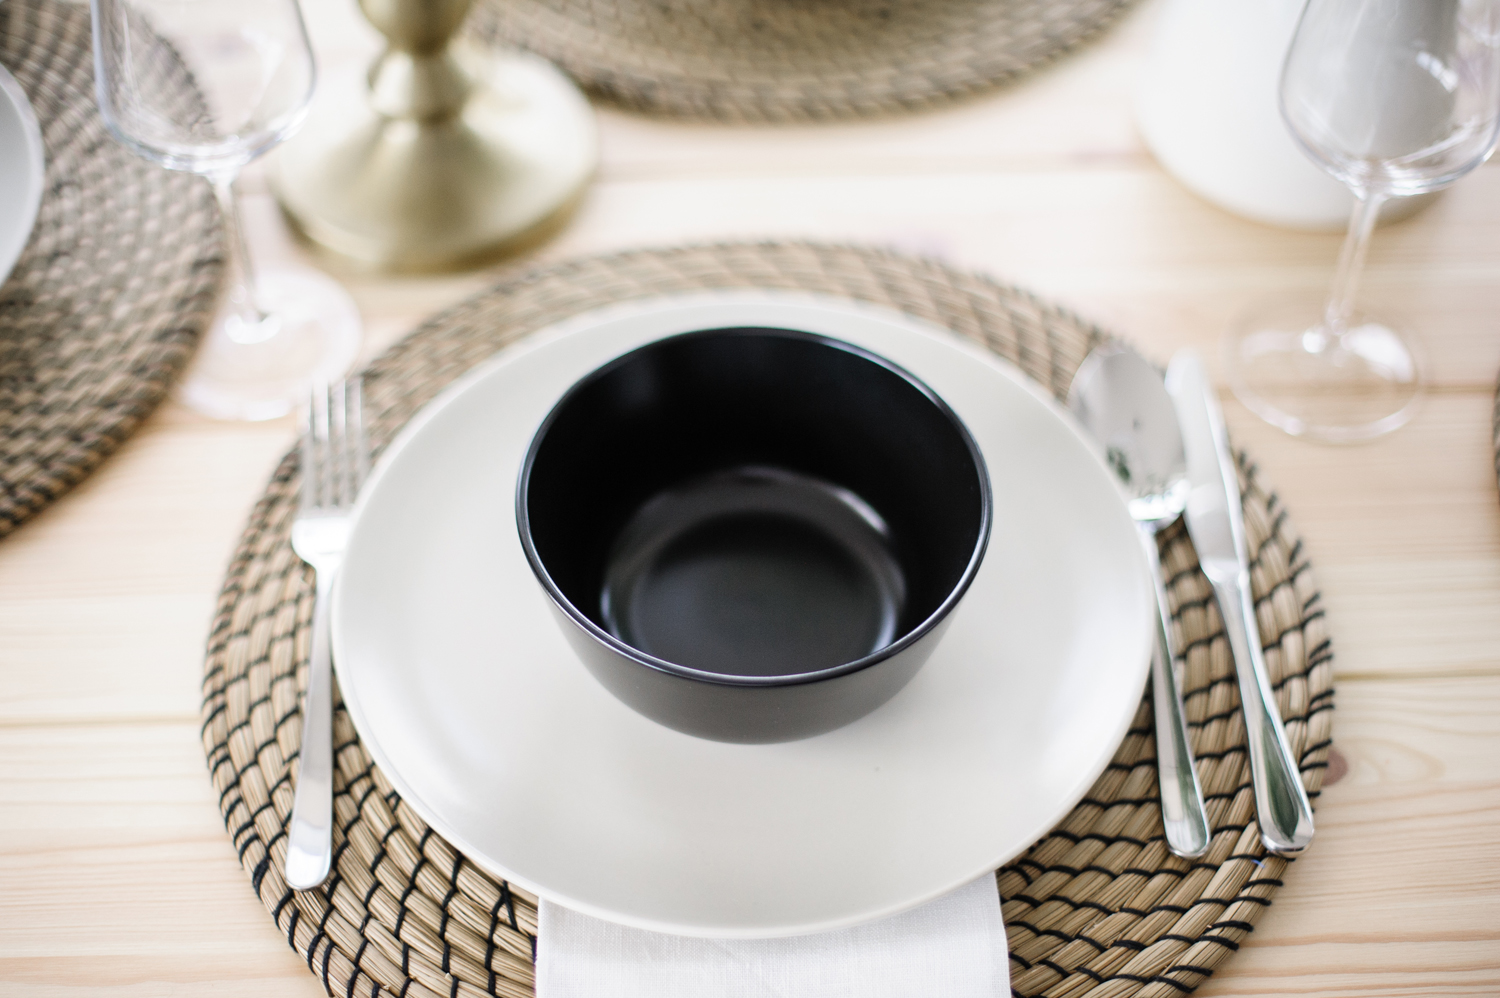 Table setting with woven charger and black bowl